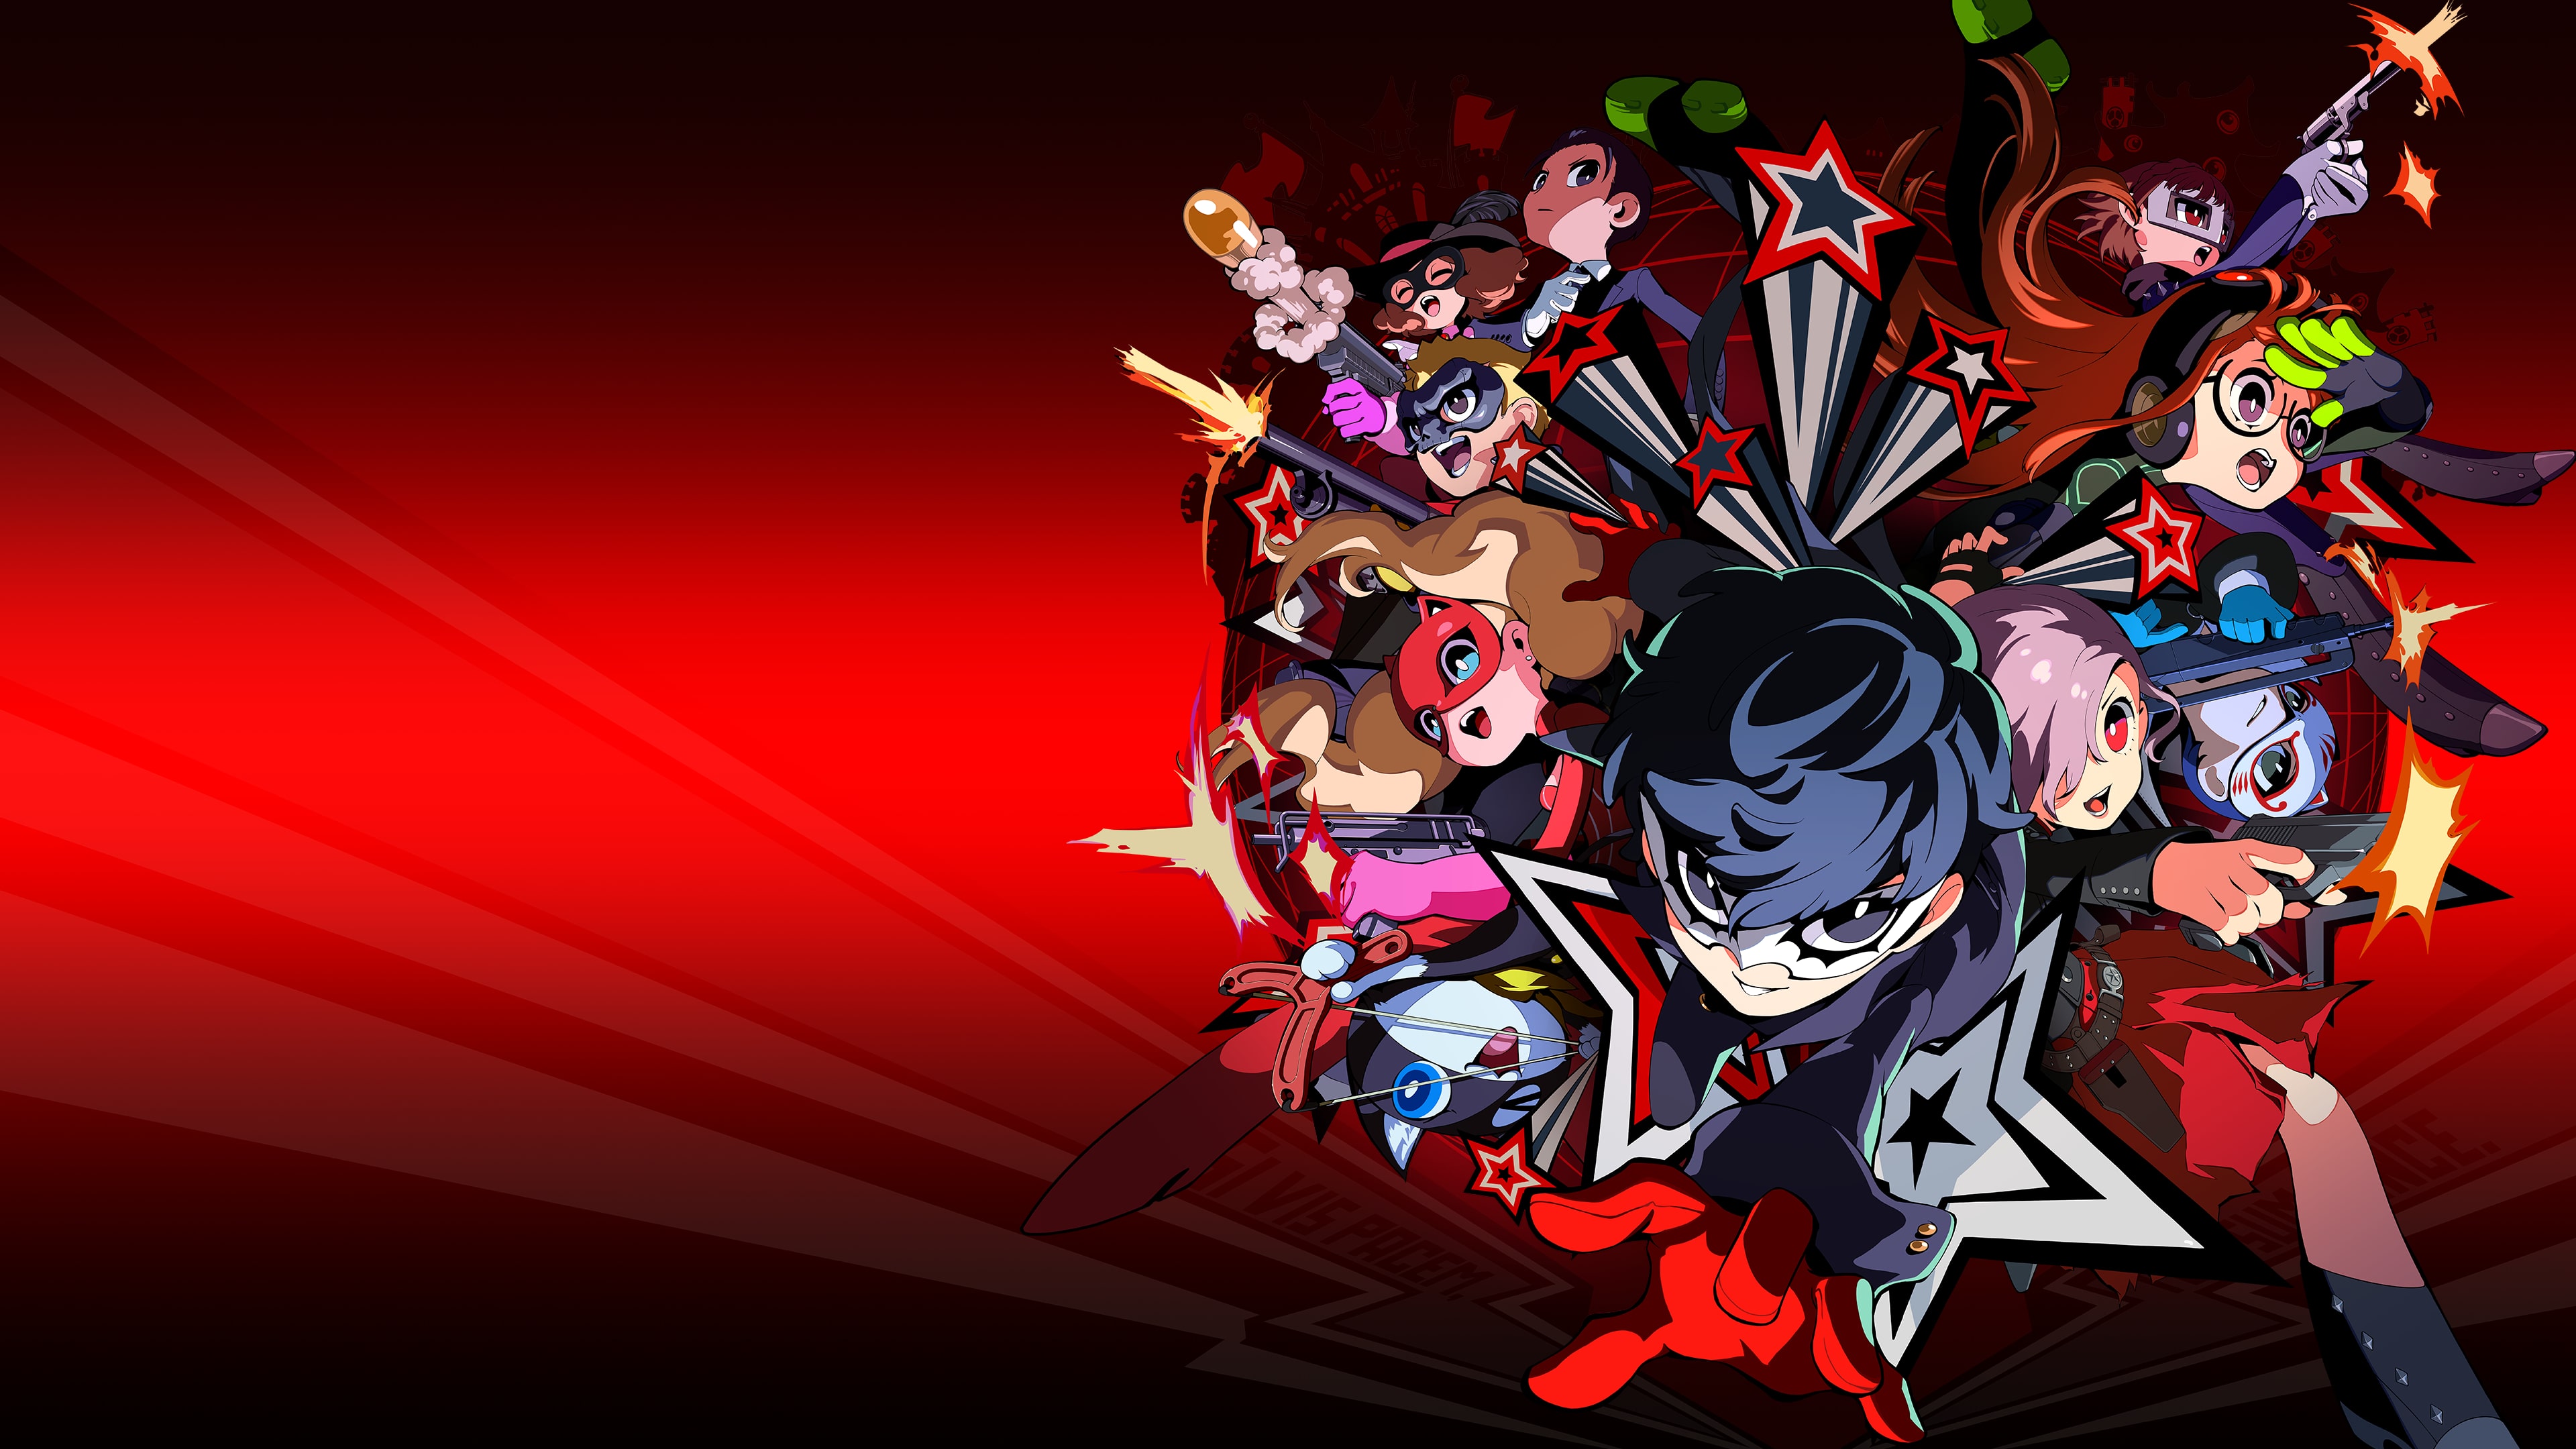 Persona 5 Tactica Digital Deluxe PS4 & PS5 (Simplified Chinese, English, Korean, Japanese, Traditional Chinese)